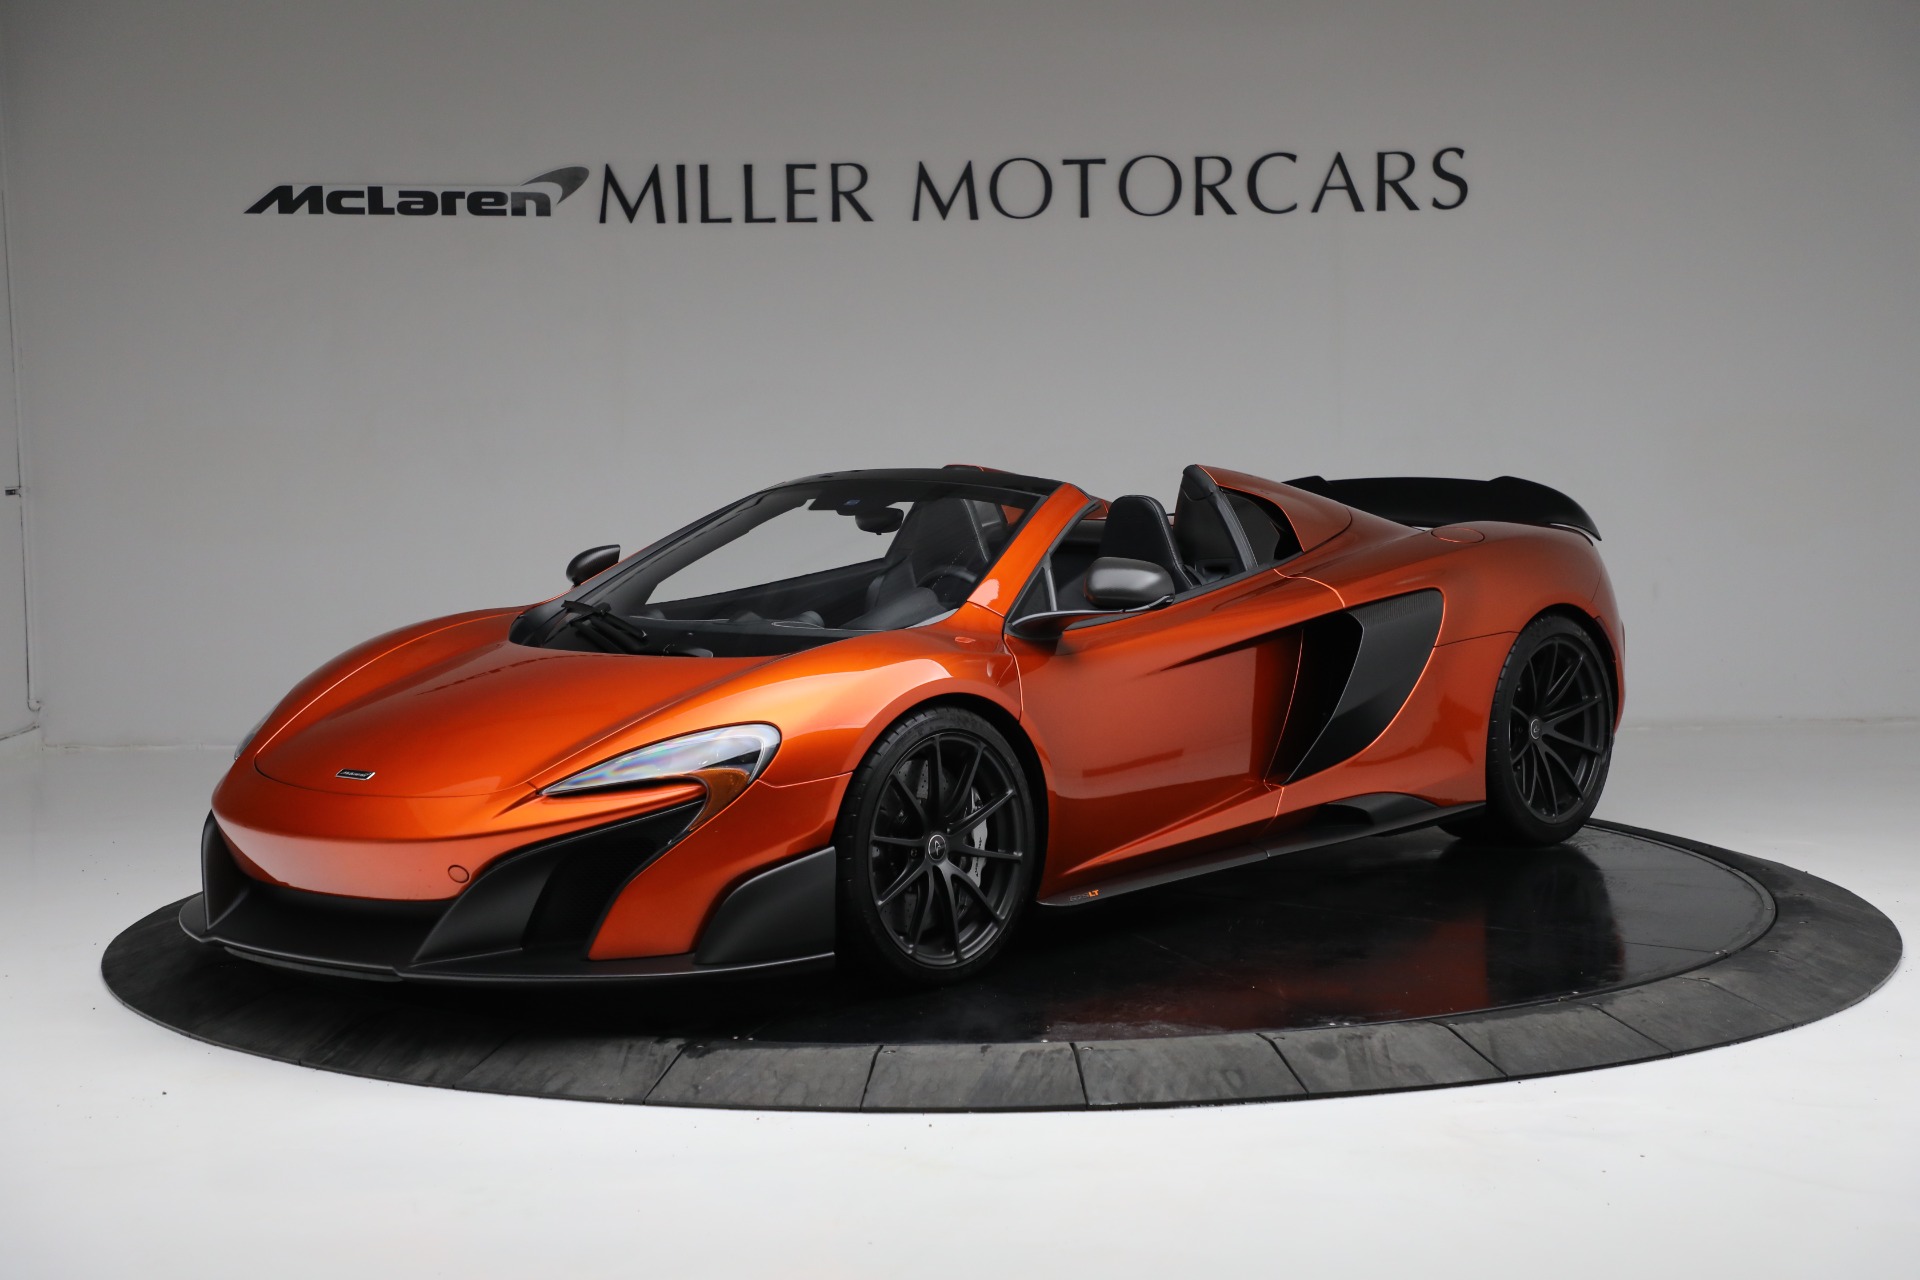 Used 2016 McLaren 675LT Spider for sale $335,900 at Pagani of Greenwich in Greenwich CT 06830 1